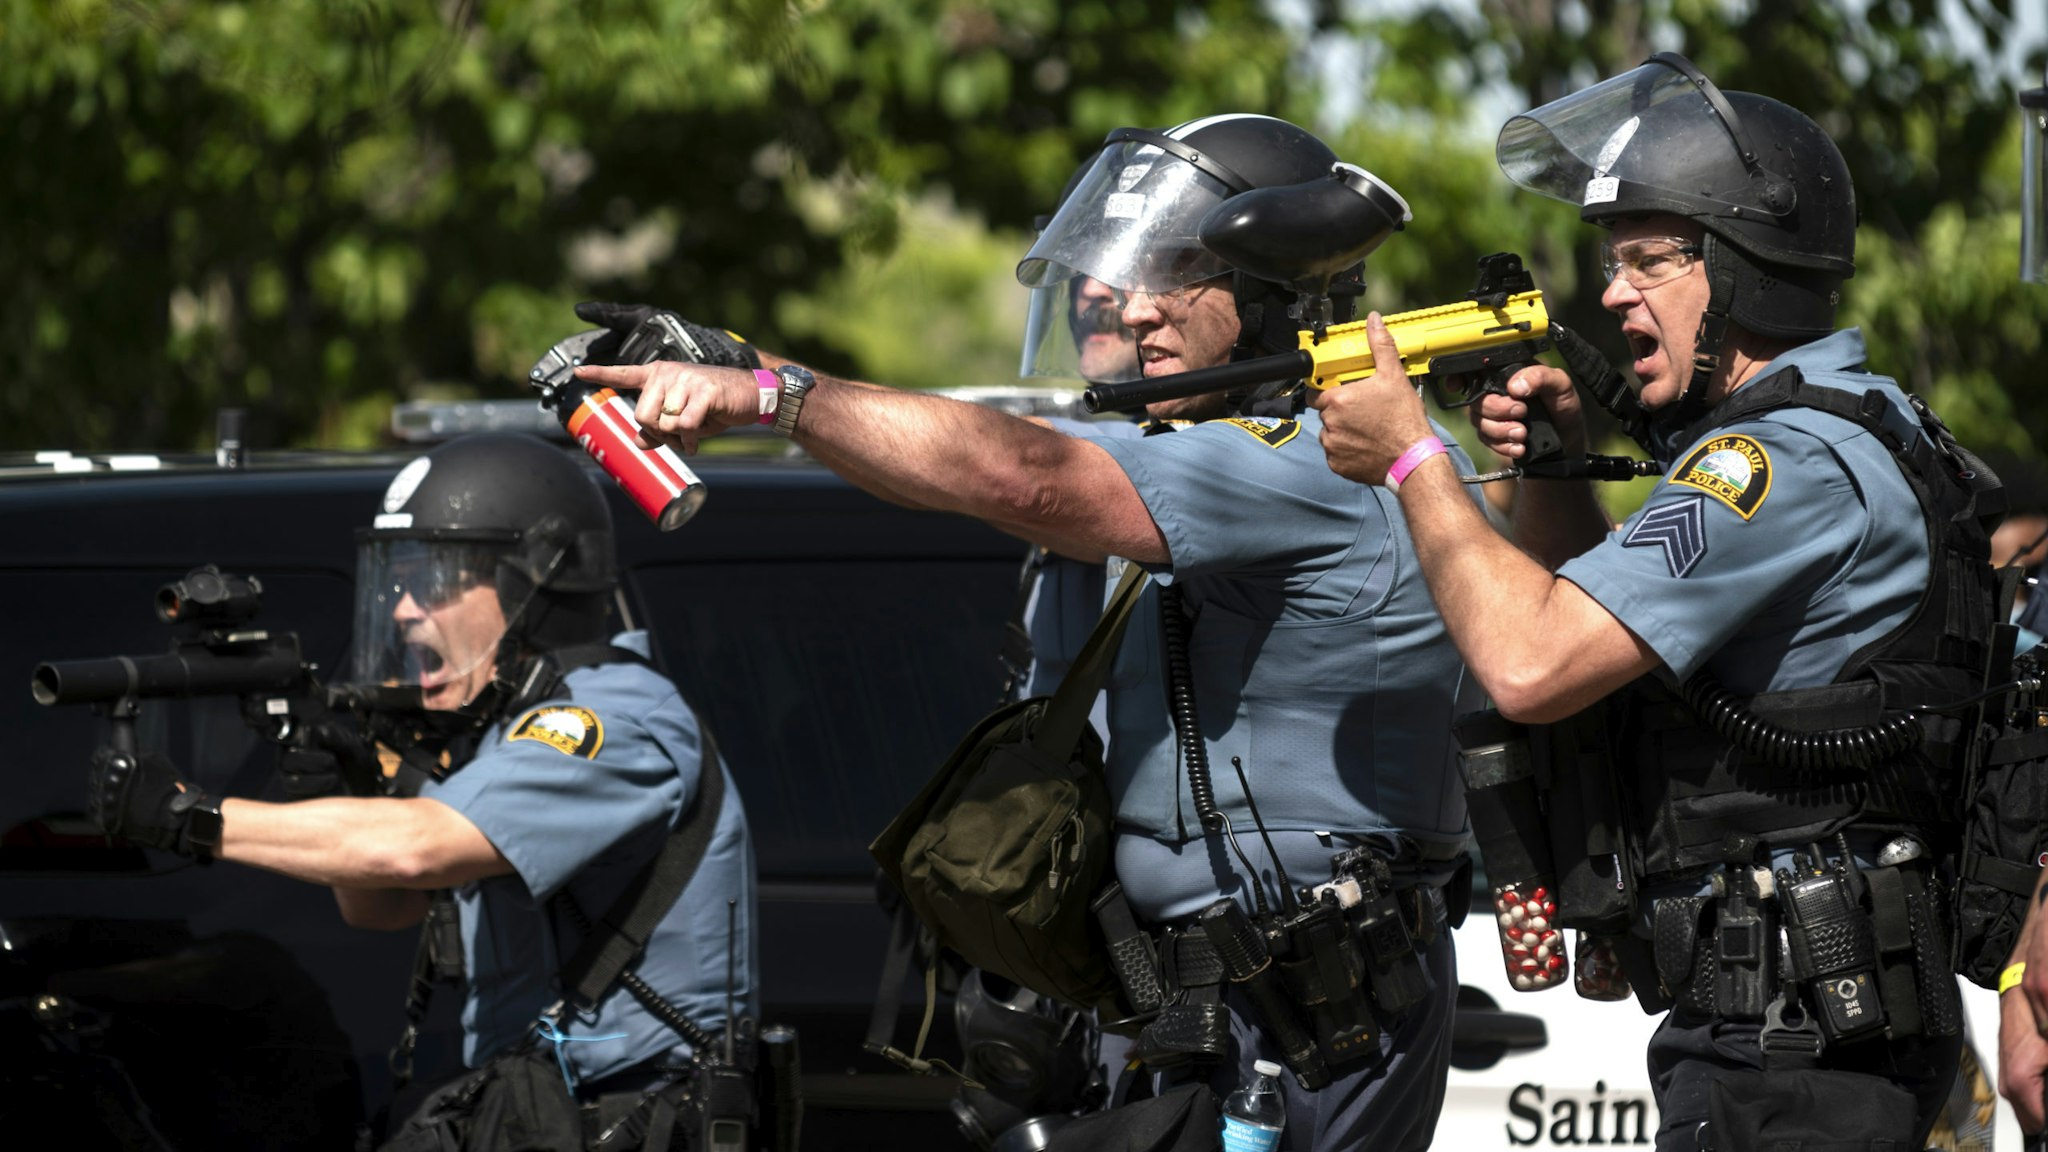 ST. PAUL, MN - MAY 28: Police aim their weapons at protesters in the parking lot of a Target store on May 28, 2020 in St. Paul, Minnesota. Police and protesters continued to clash for a third night after George Floyd was killed in police custody on Monday.